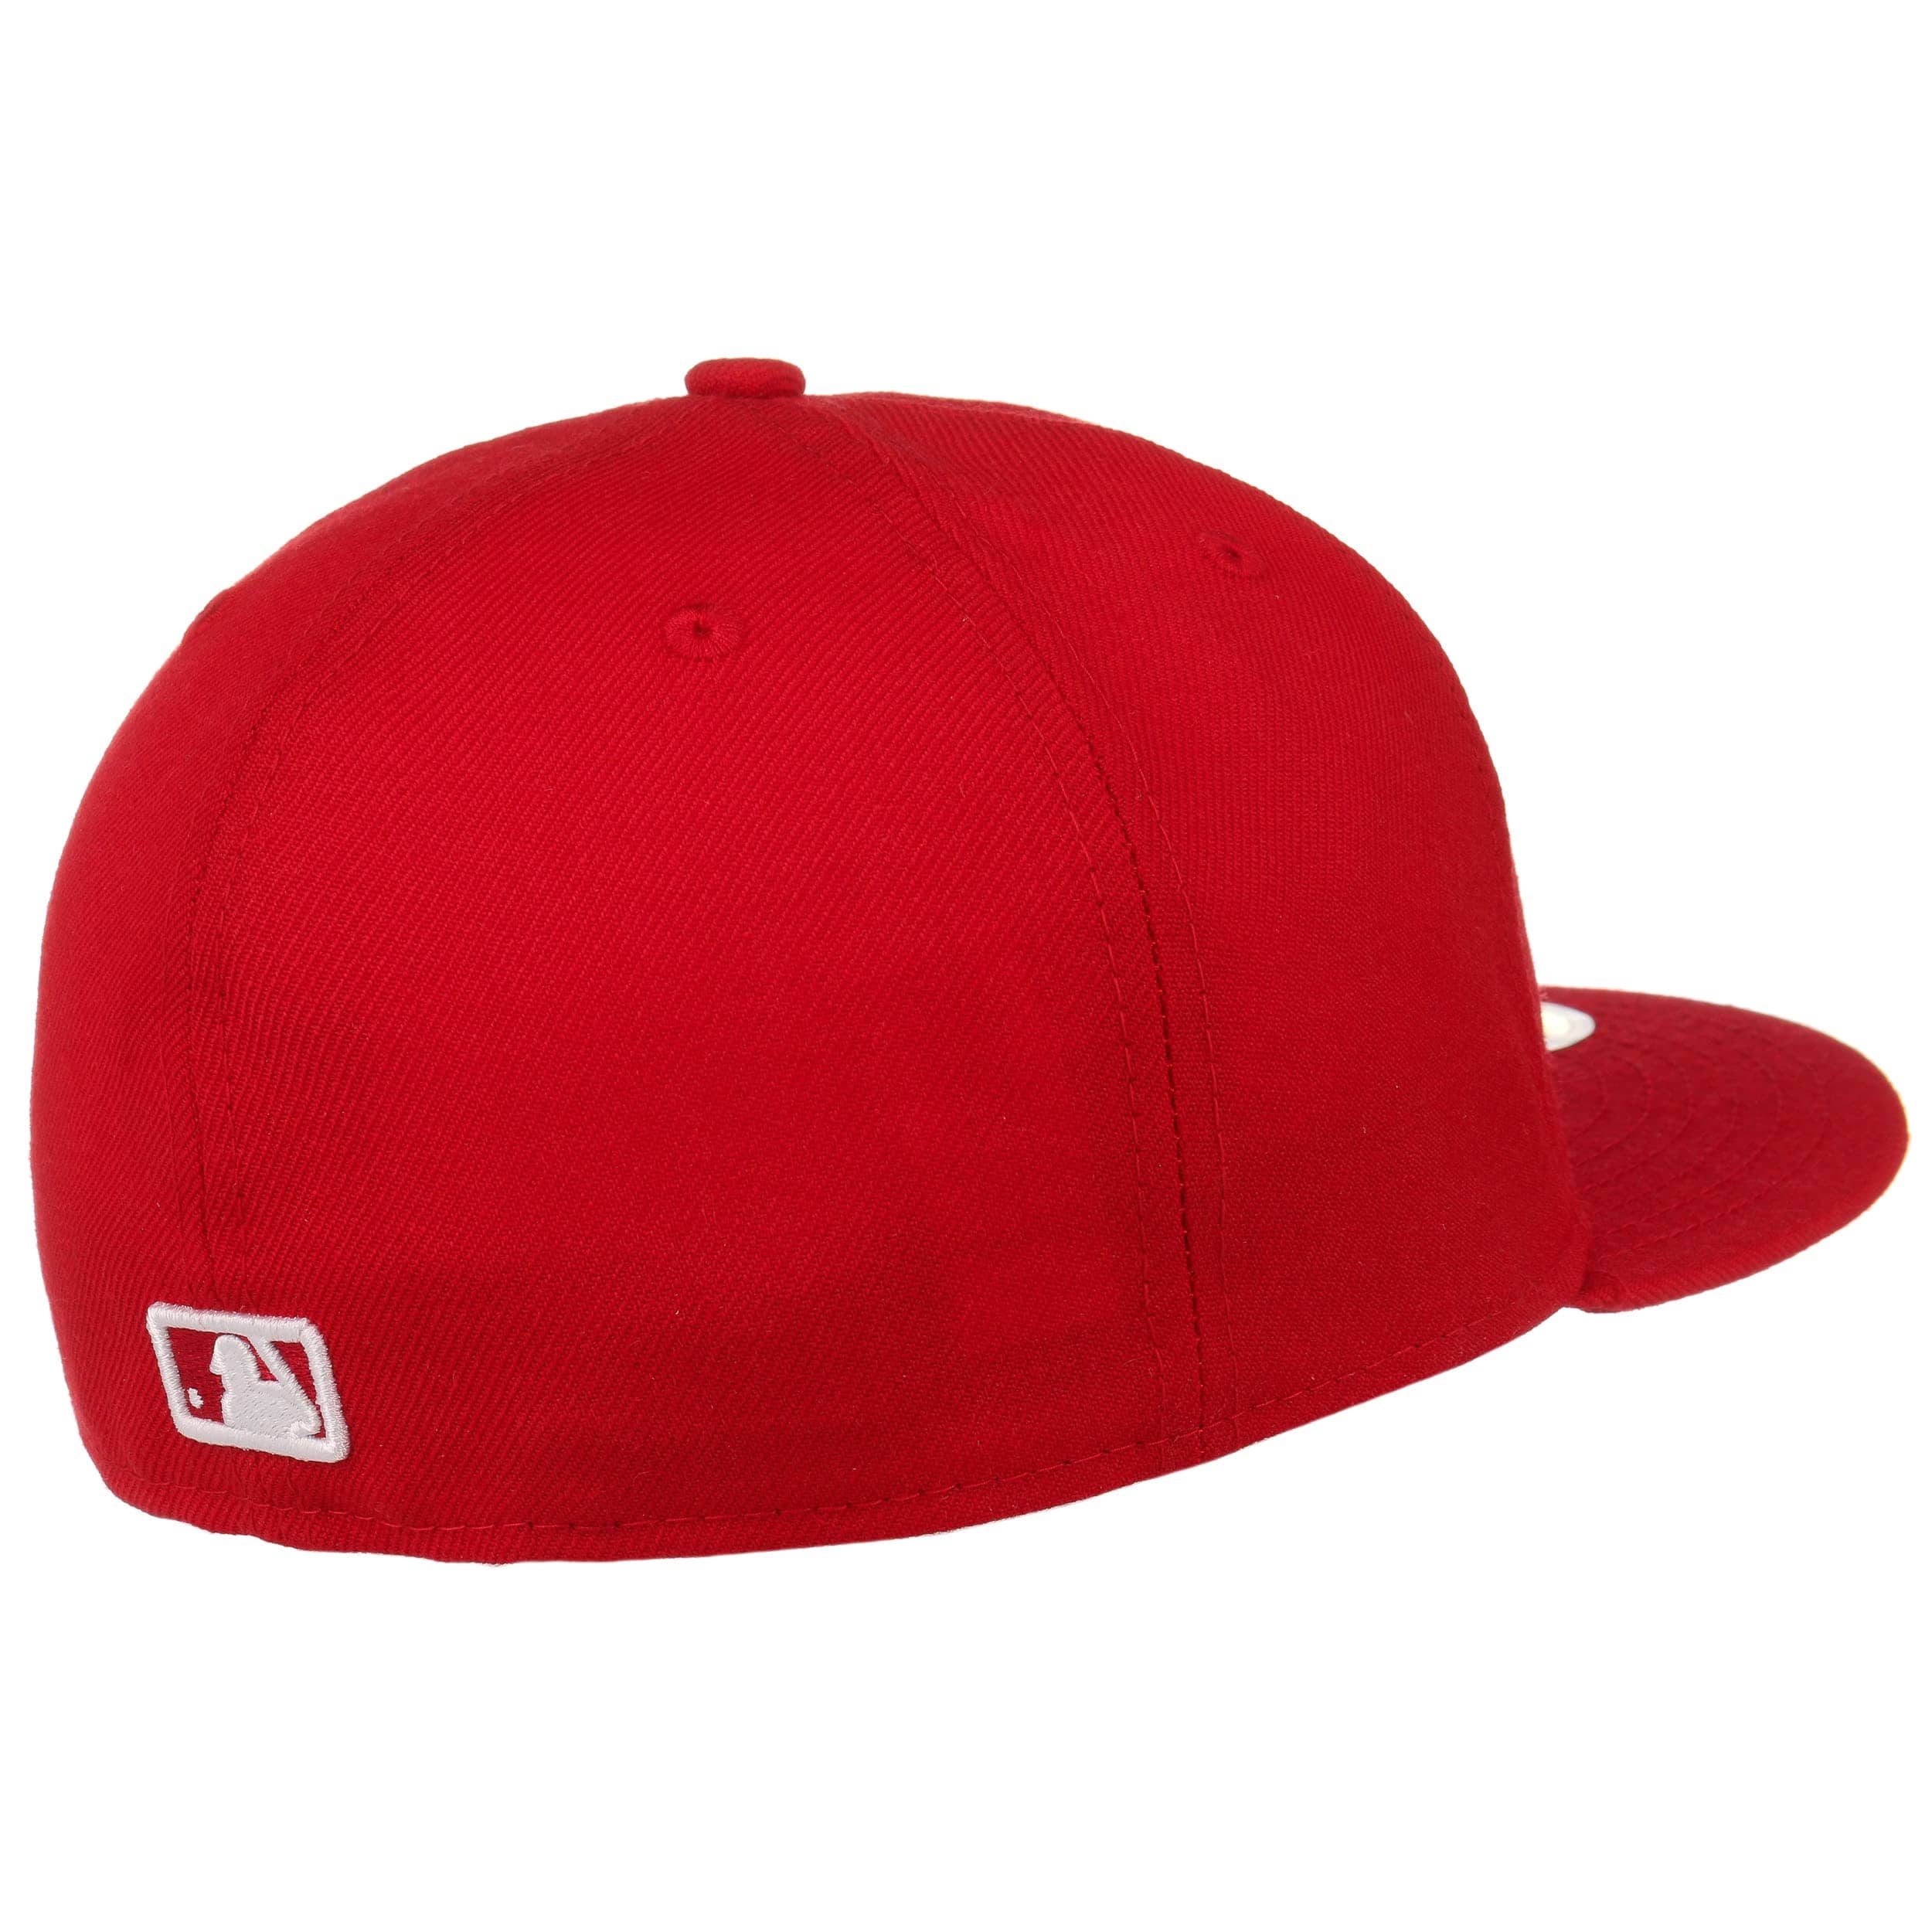 MLB Fleece Ball Cap 1ea  Best Price and Fast Shipping from Beauty